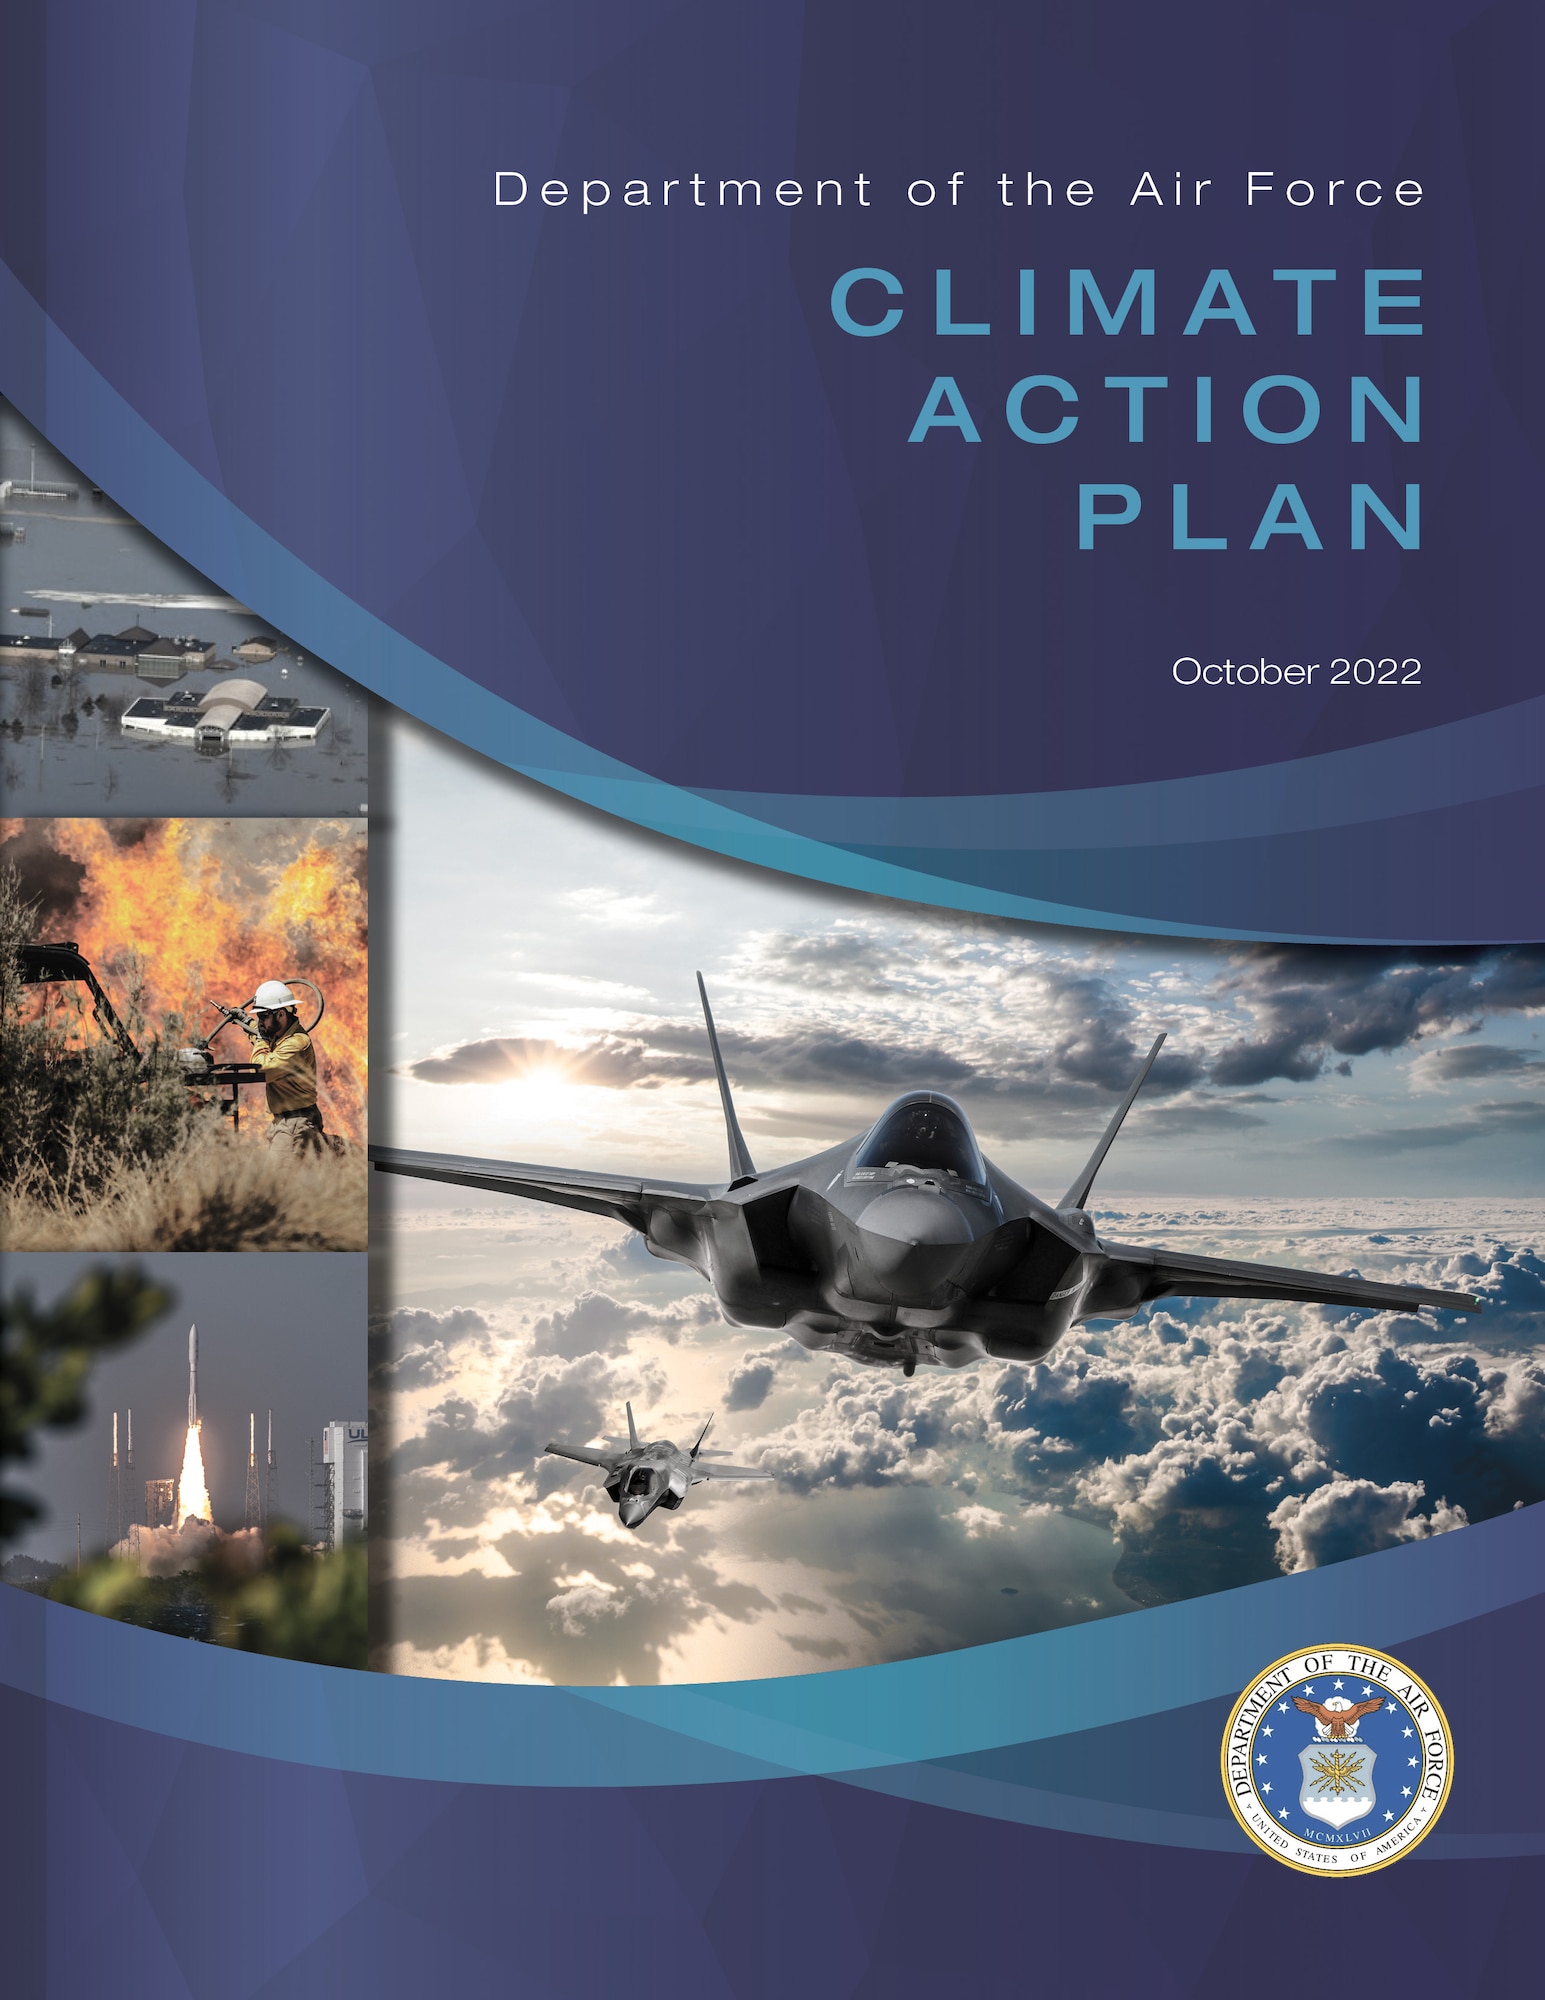 Front cover of the Department of the Air Force Climate Action Plan, released in October 2022.